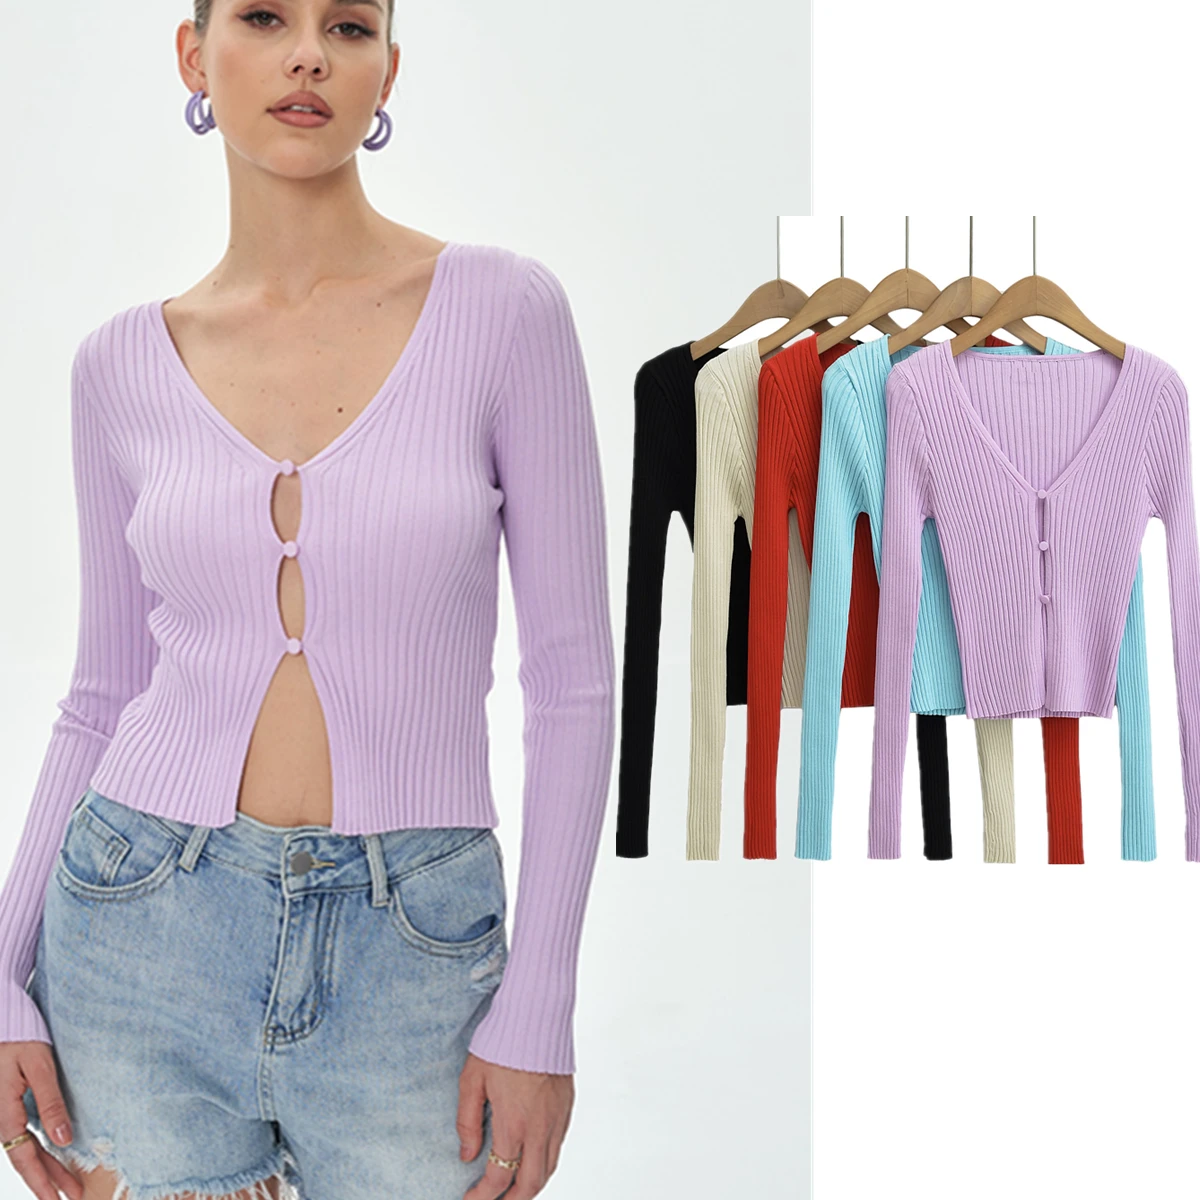 

Dave&Di Knitted Tshirts Women Tops Fashion Ladies Hollow Out Casual Single Breasted Cardigans Women Sweater